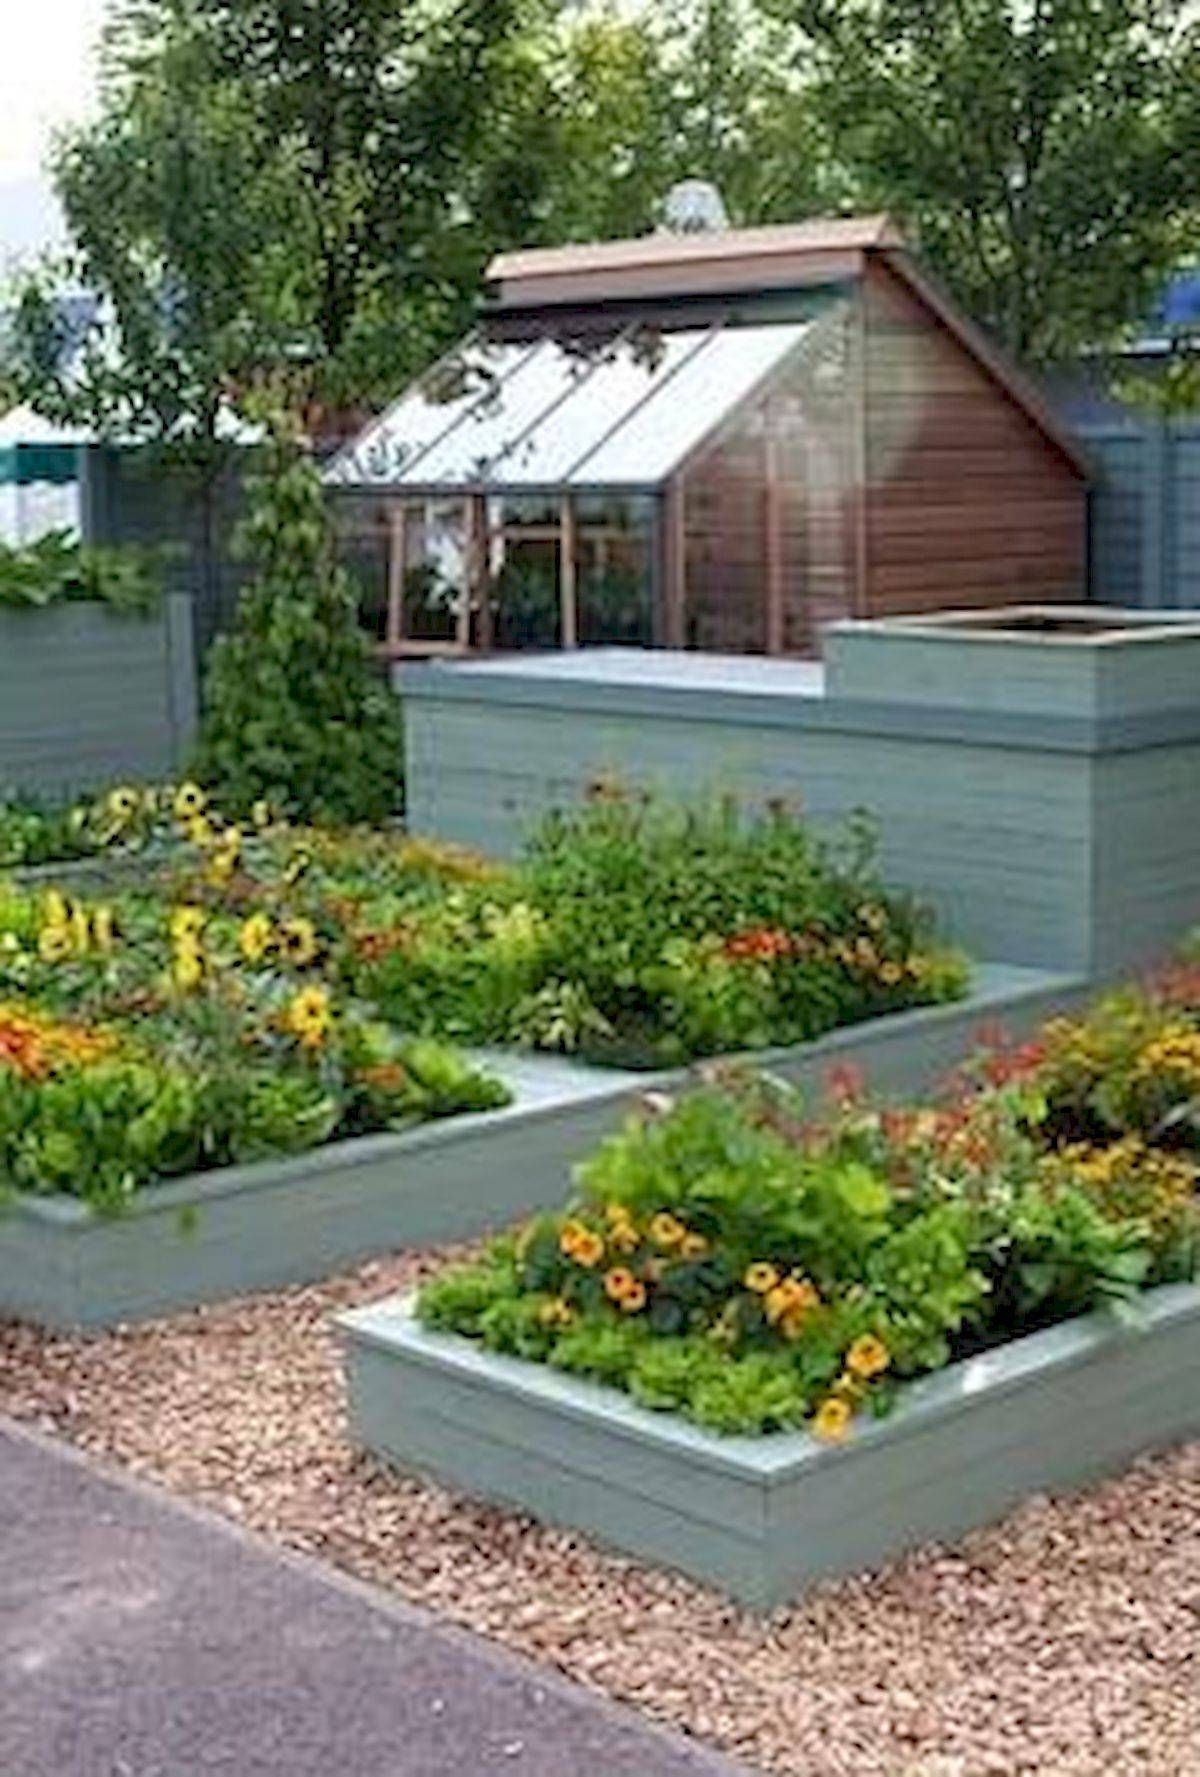 Simple Raised Garden Bed Inspirations